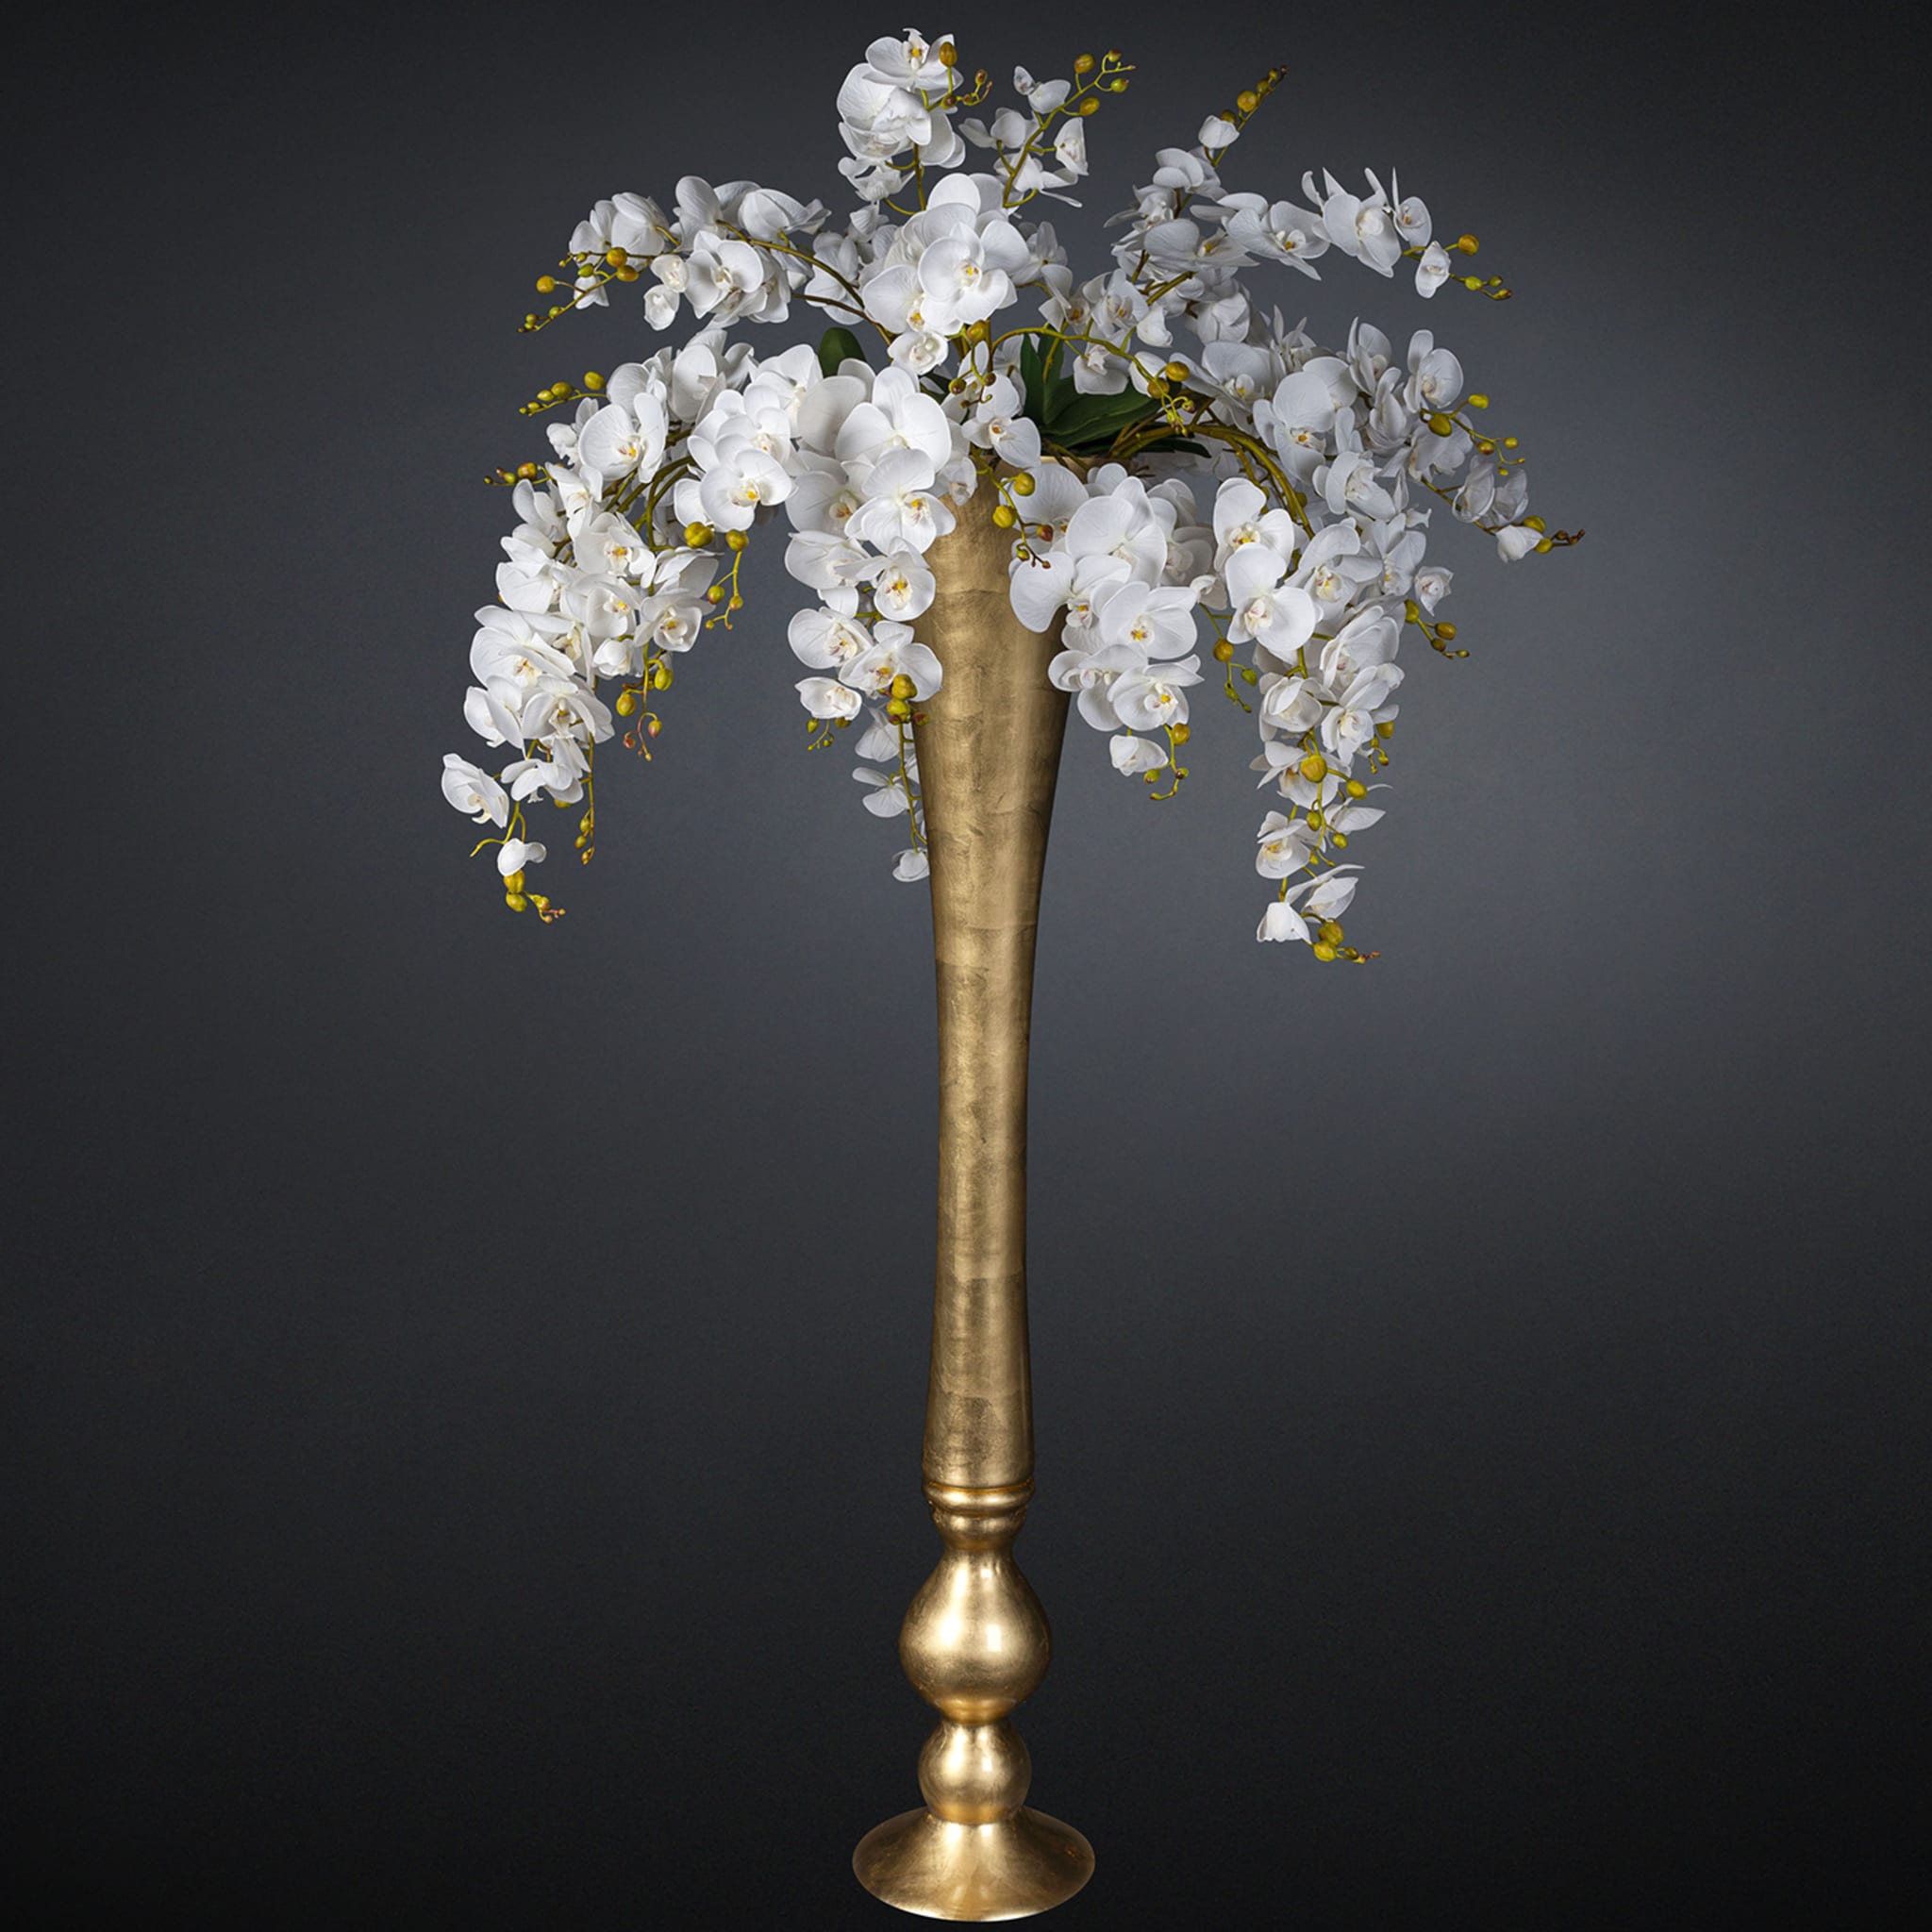 Eternity Madame Butterfly Faux Floral Composition with Gold Vase - Alternative view 1